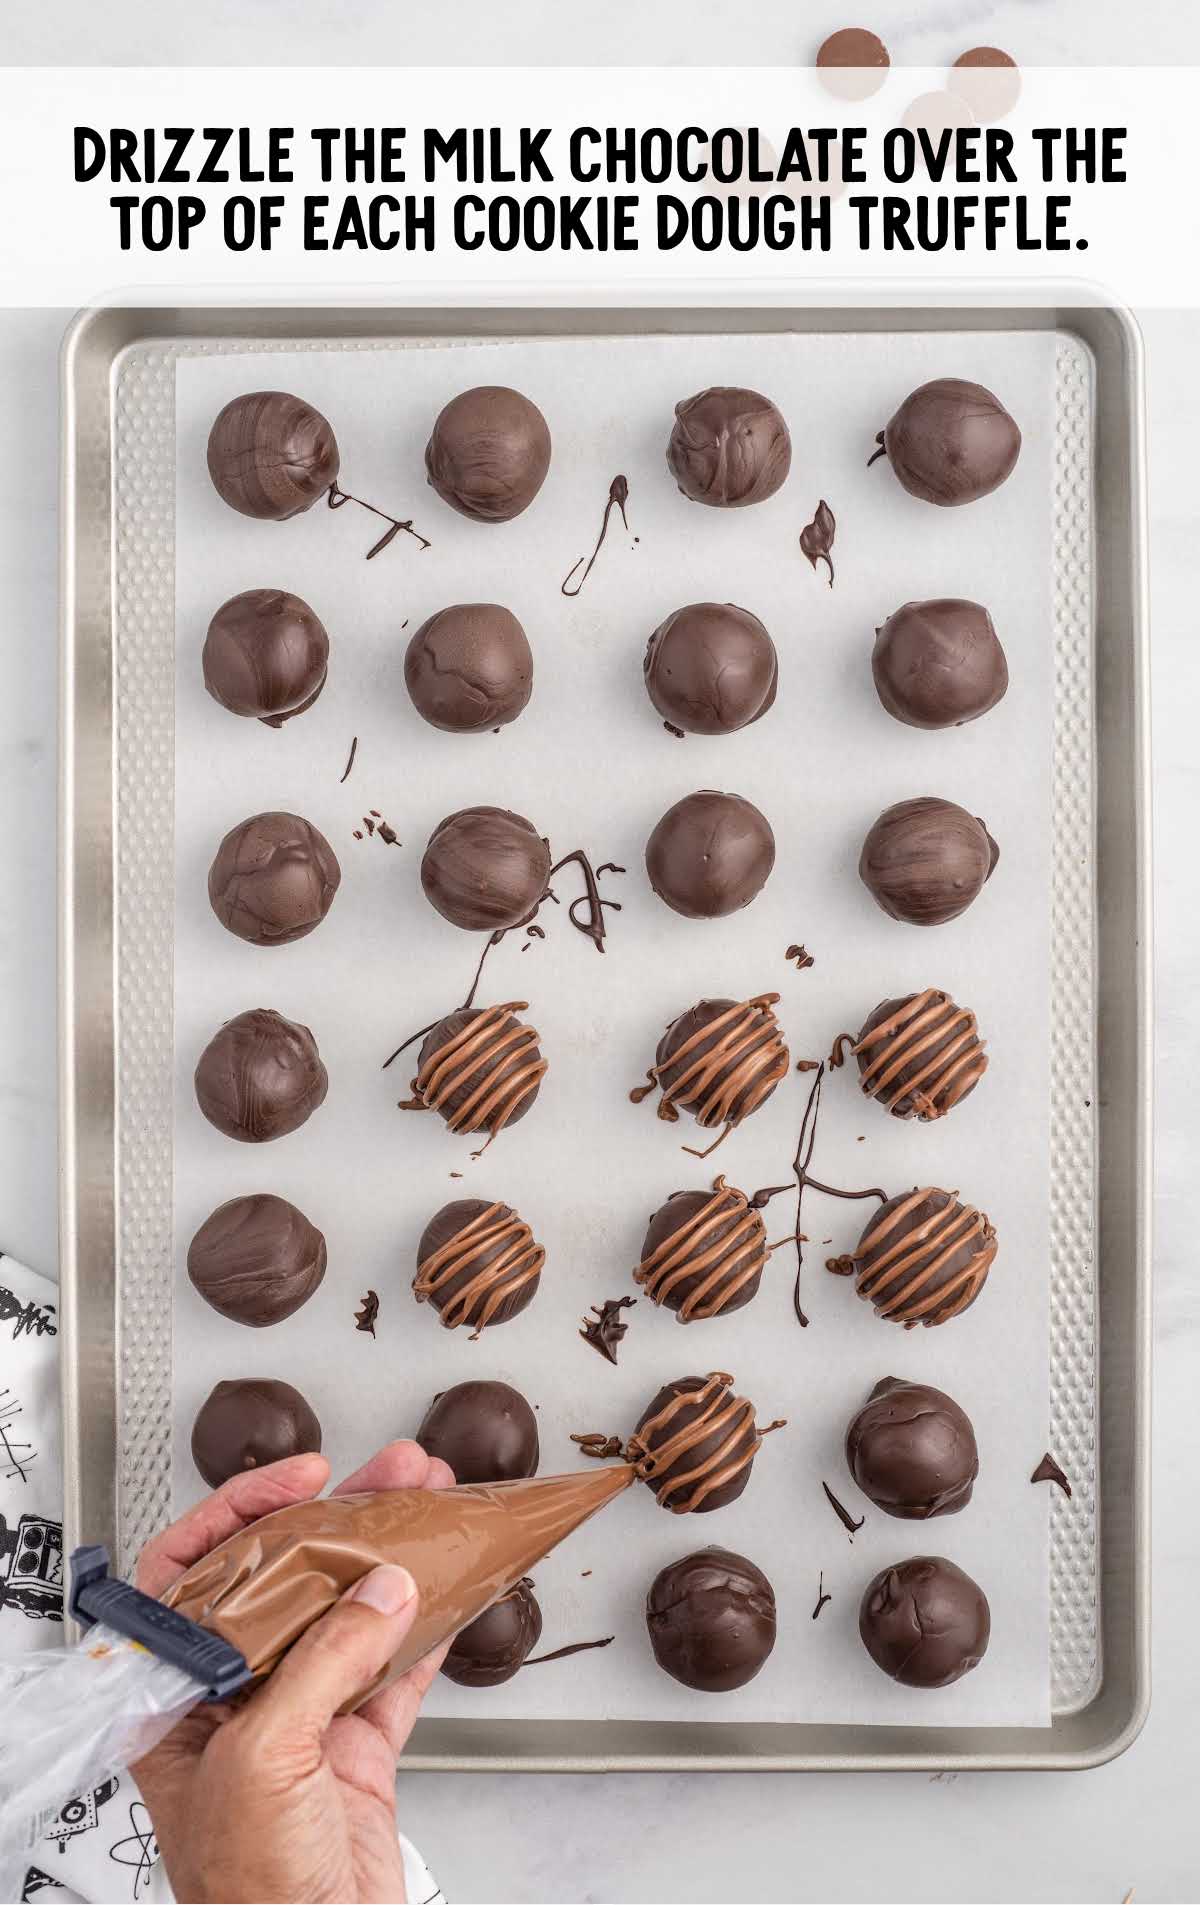 milk chocolate drizzled over the top of each cookie dough truffle on a baking sheet